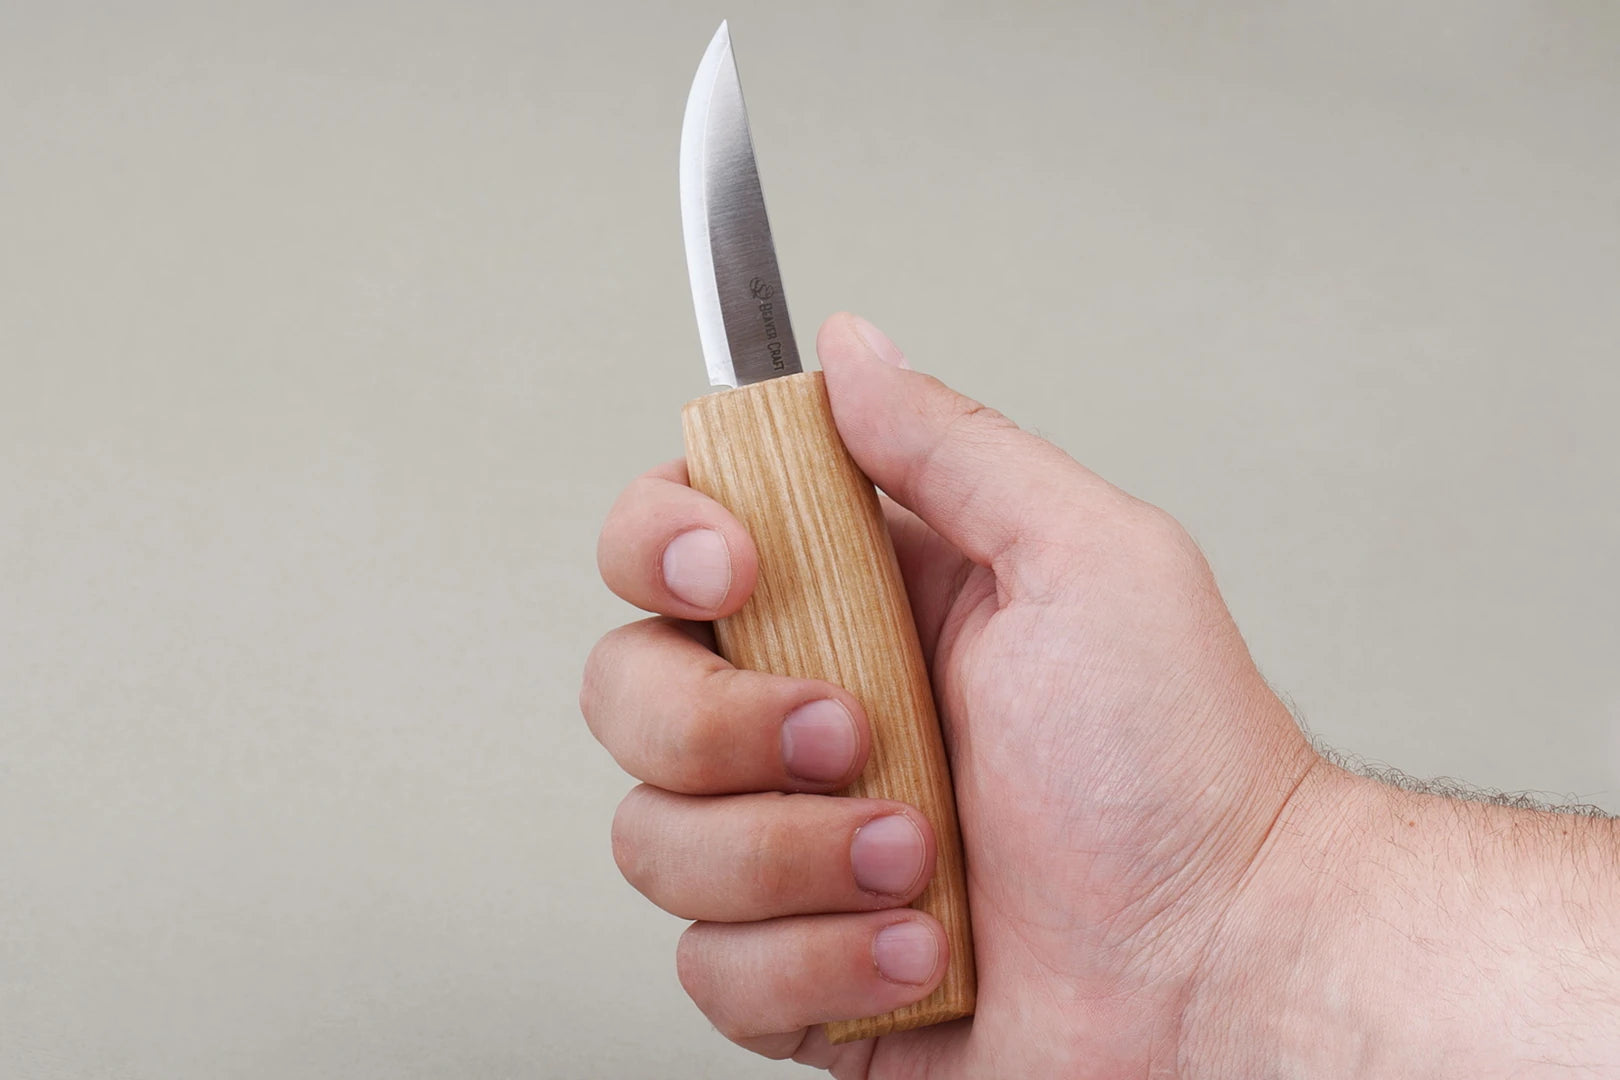 BeaverCraft, Whittling Knife C1M - Small Sloyd Knife - Wood Carving Knives  Tools for Beginners - Carbon Steel Scandi Grind Blade - Beginners Whittling  Tools 